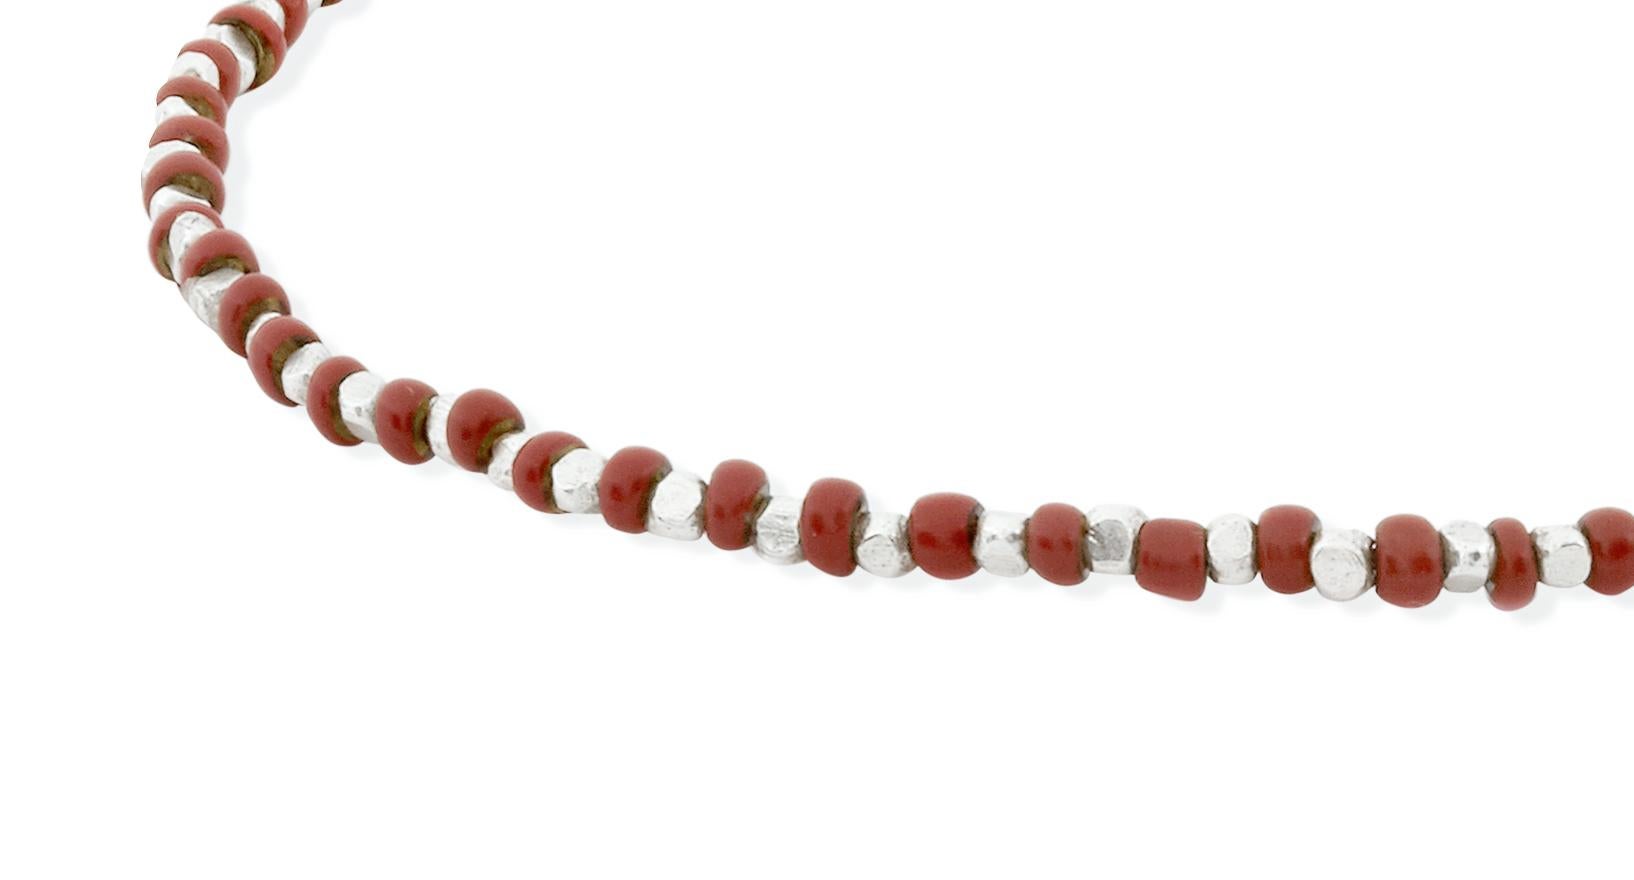 This bracelet features antique rust coloured Venetian glass trade beads, accented with alternating fine silver beads.  Strung on strong, stretchy elastic.

These antique Venetian trade beads were produced in the early 1900s primarily for the palm